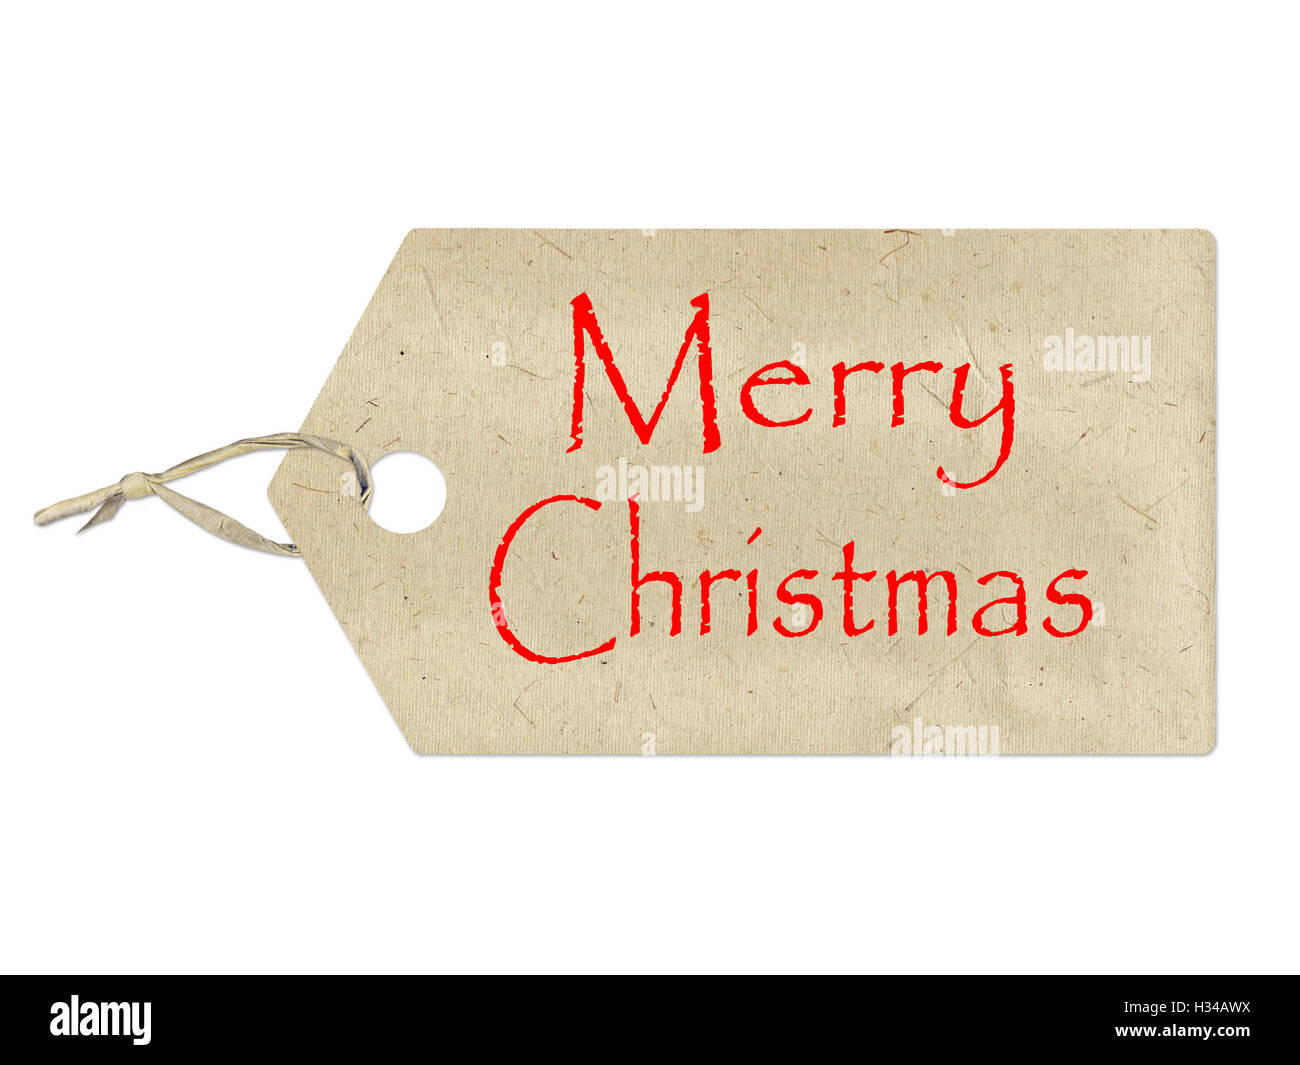 Merry Christmas written on a brown paper label on white background Stock Photo